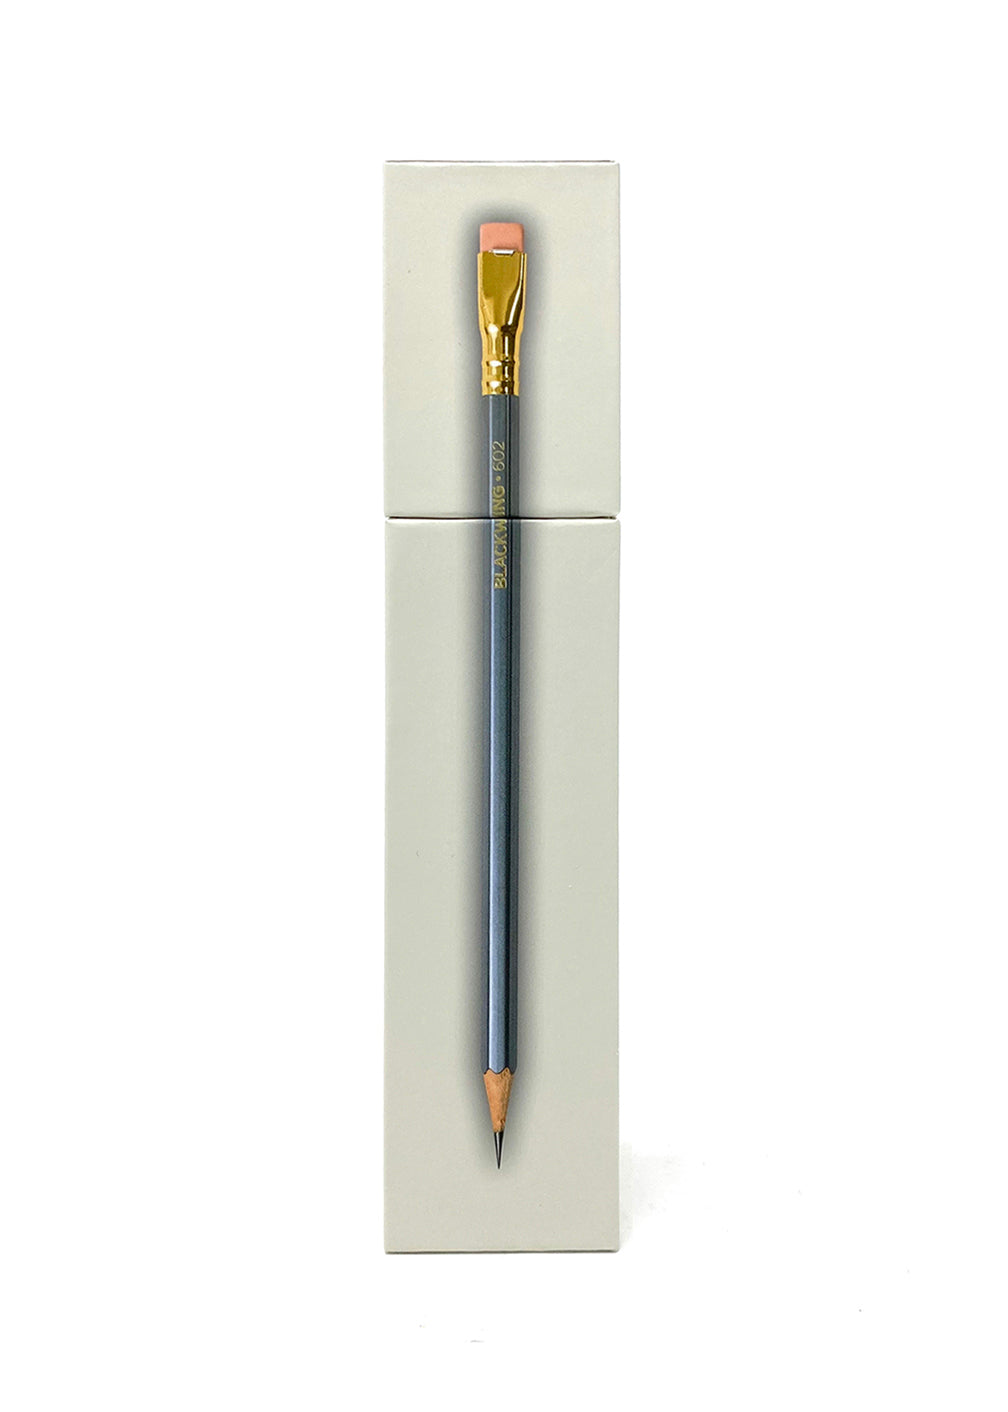 The Best Pencil for Writing is the Palomino Blackwing